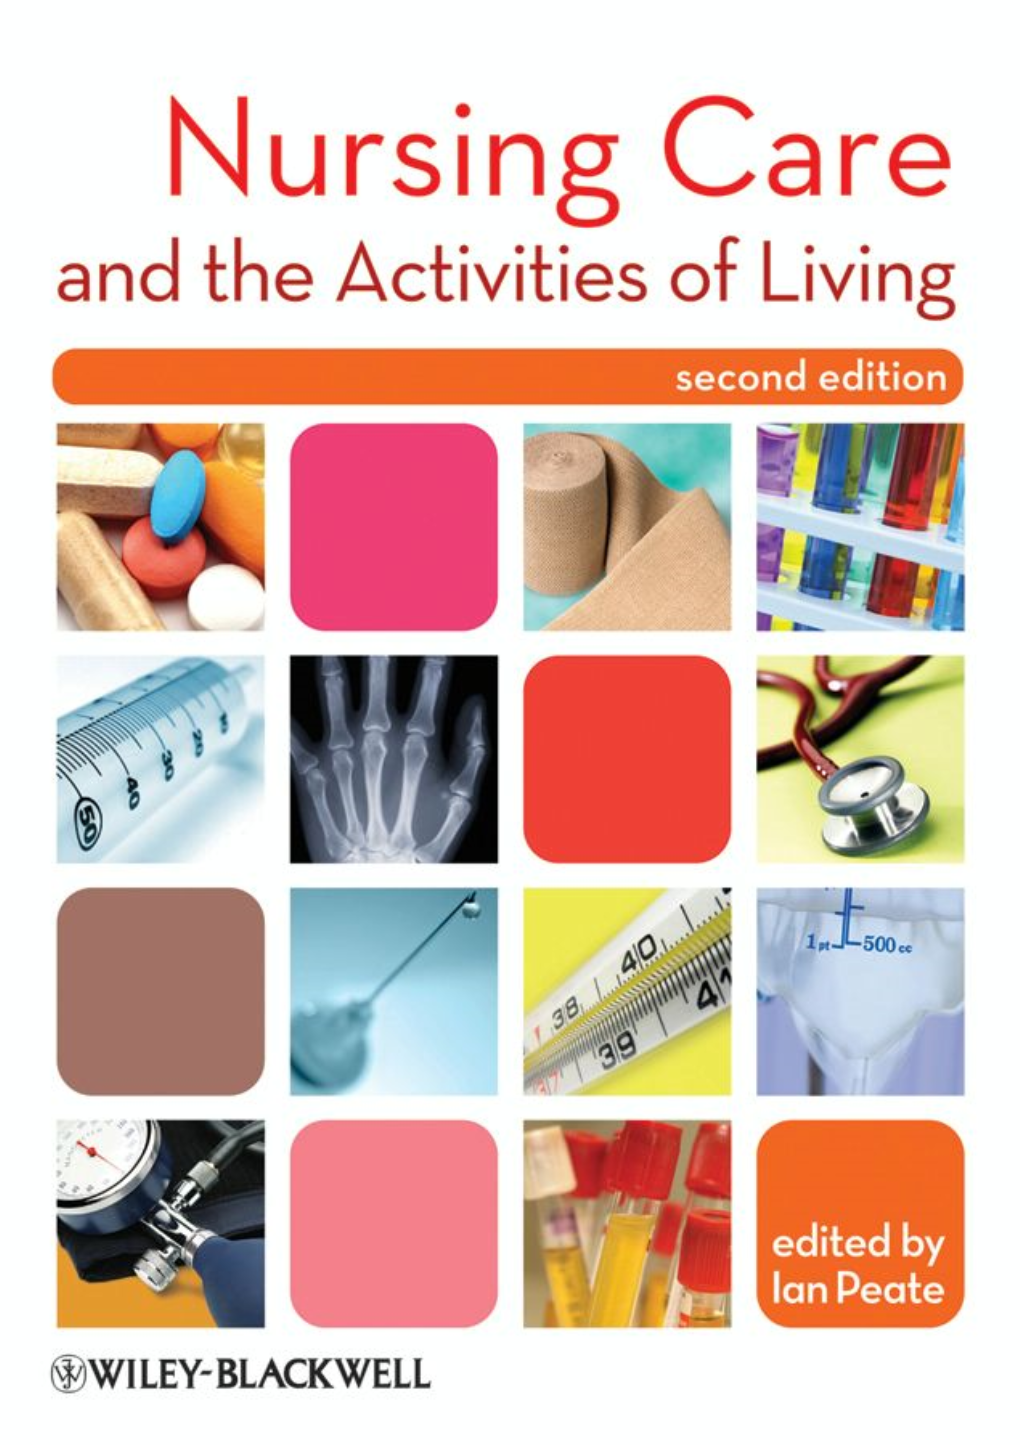 Nursing Care and the Activities of Living Second Edition